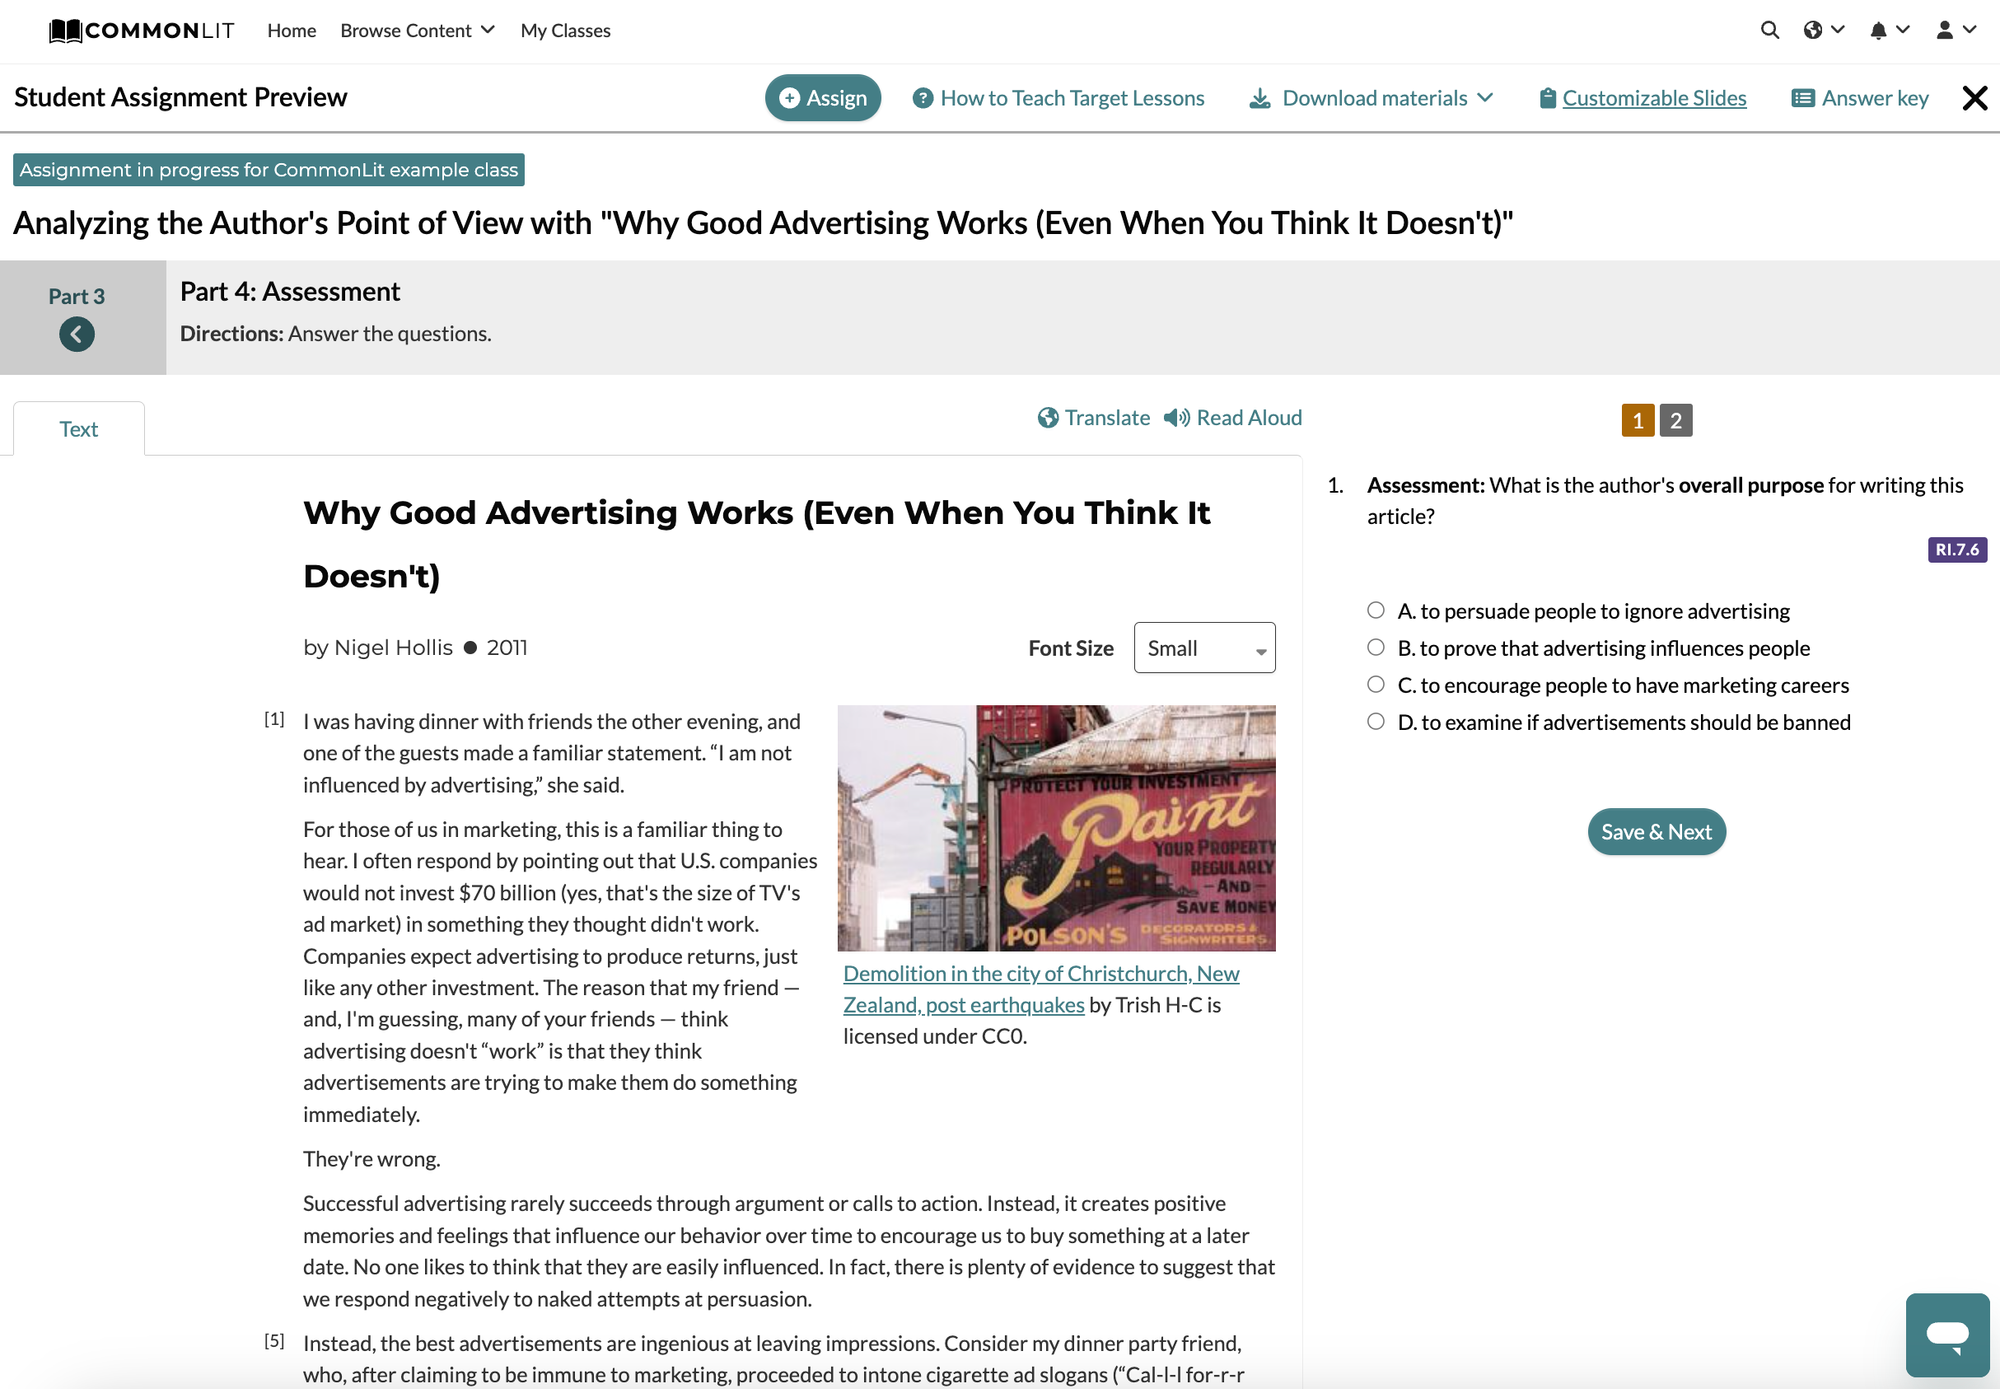 "Assessment" section for "Why Good Advertising Works (Even When You Think It Doesn't" Target Lesson